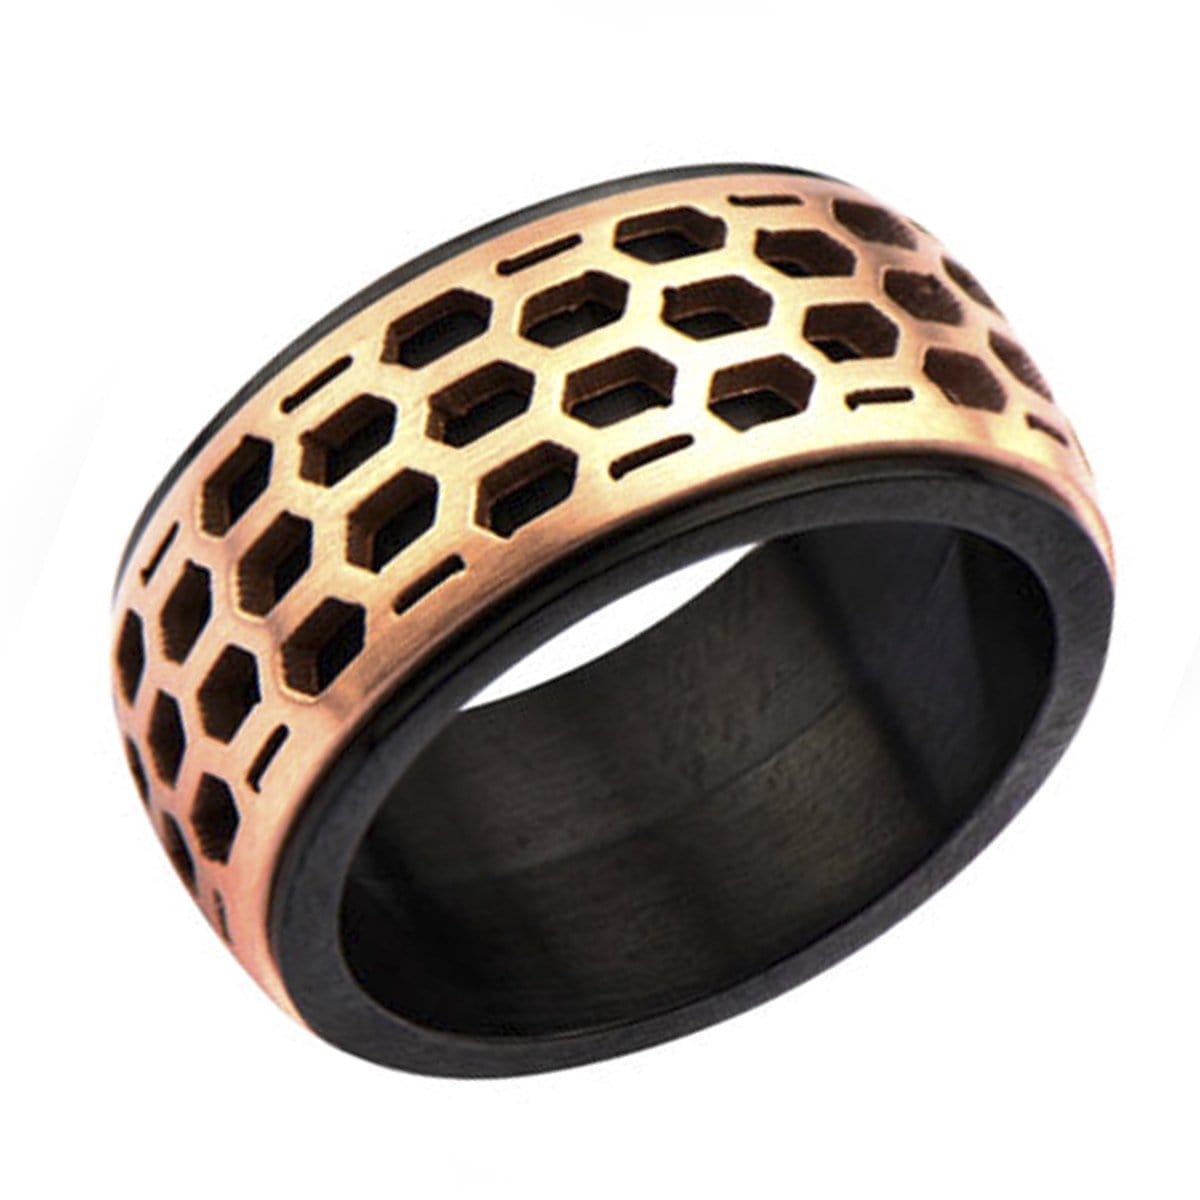 INOX JEWELRY Rings Rose Tone and Black Stainless Steel Car Grille Polished Band Ring